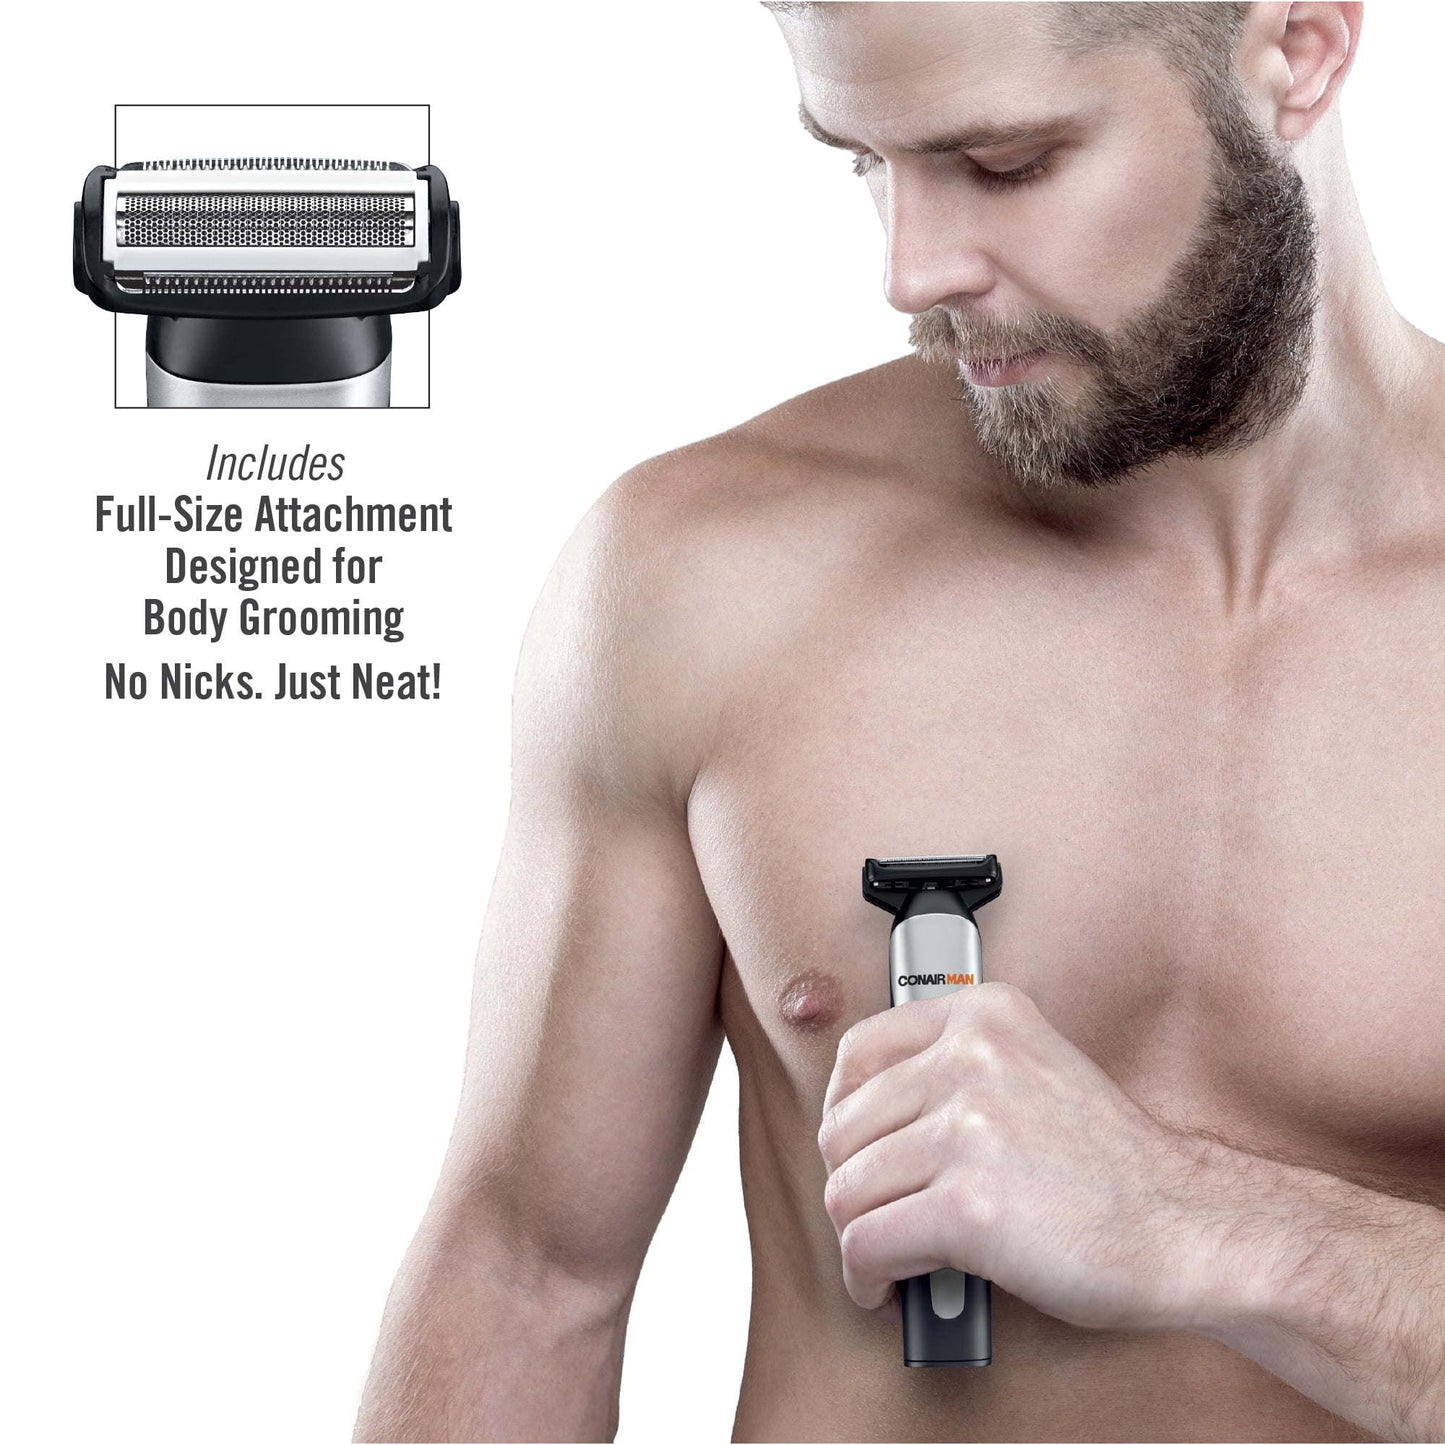 ConairMAN Cordless Lithium Ion Powered All-in-One Face and Body Trimmer for Men Rechargeable GMT24